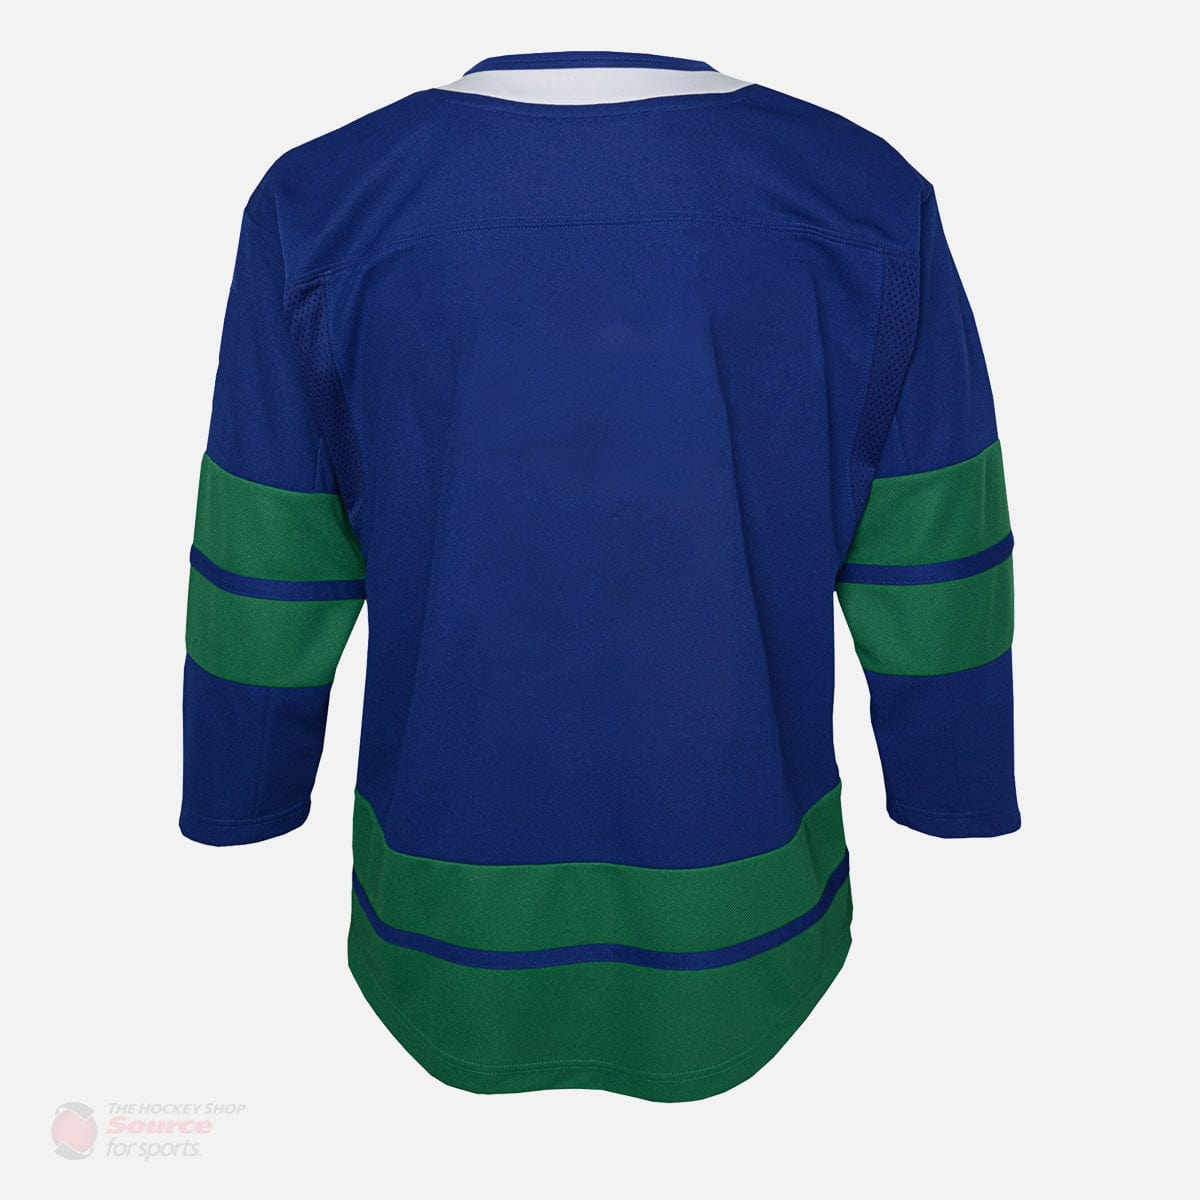 Vancouver Canucks Alternate Outer Stuff Premier Youth Jersey